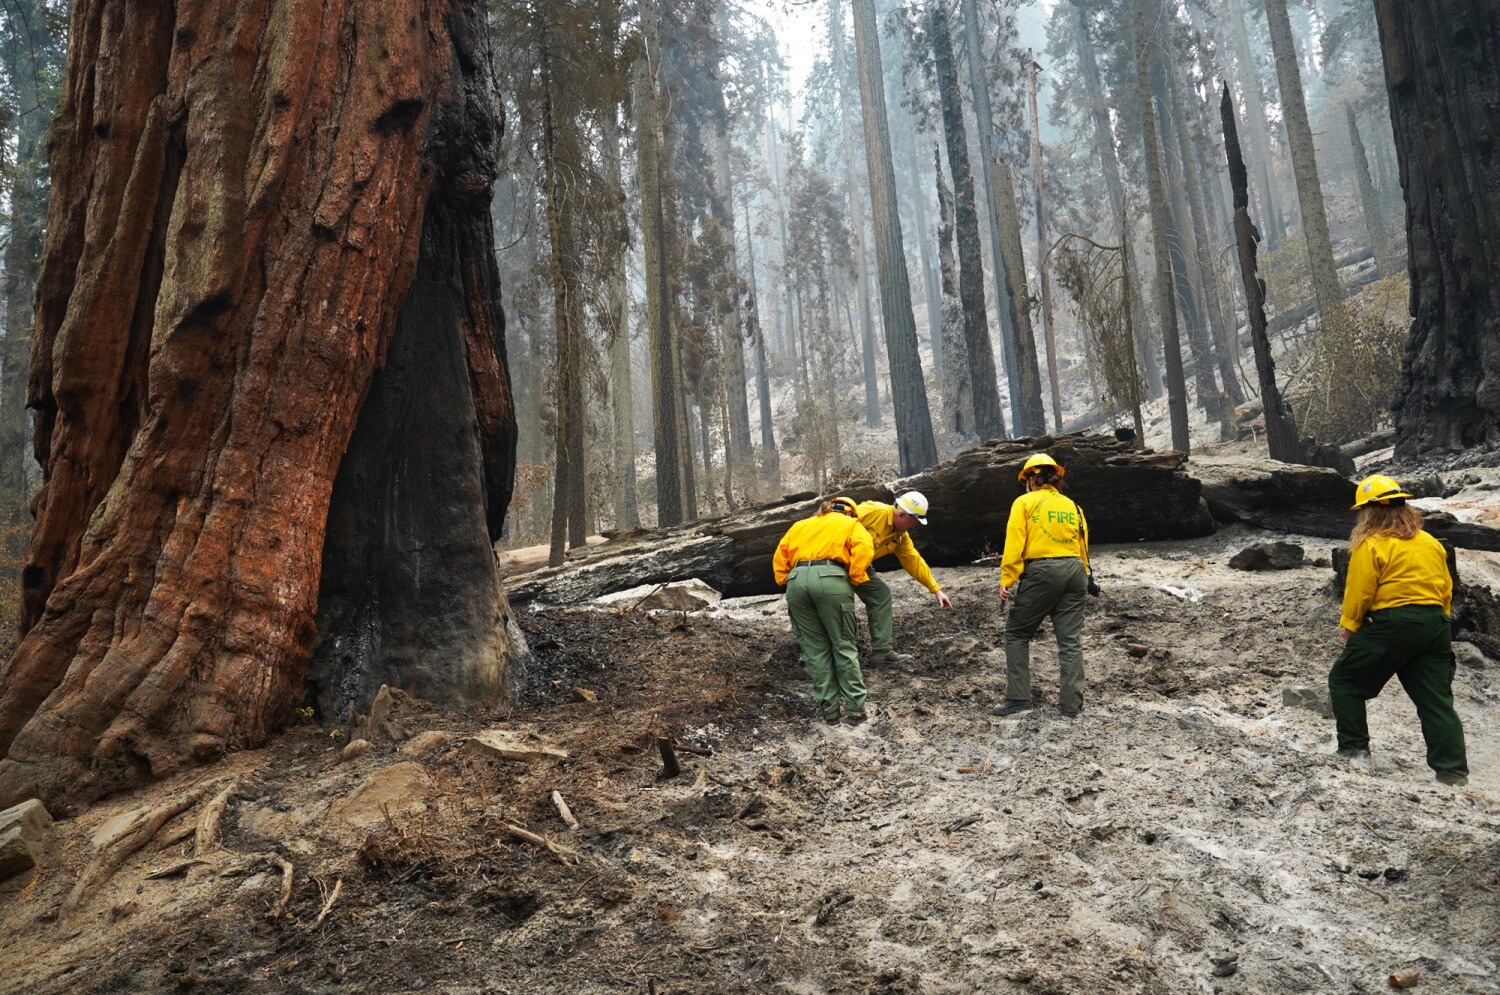 KNP Complex fire triggers flurry of new evacuations, as flames threaten more giant sequoia trees    